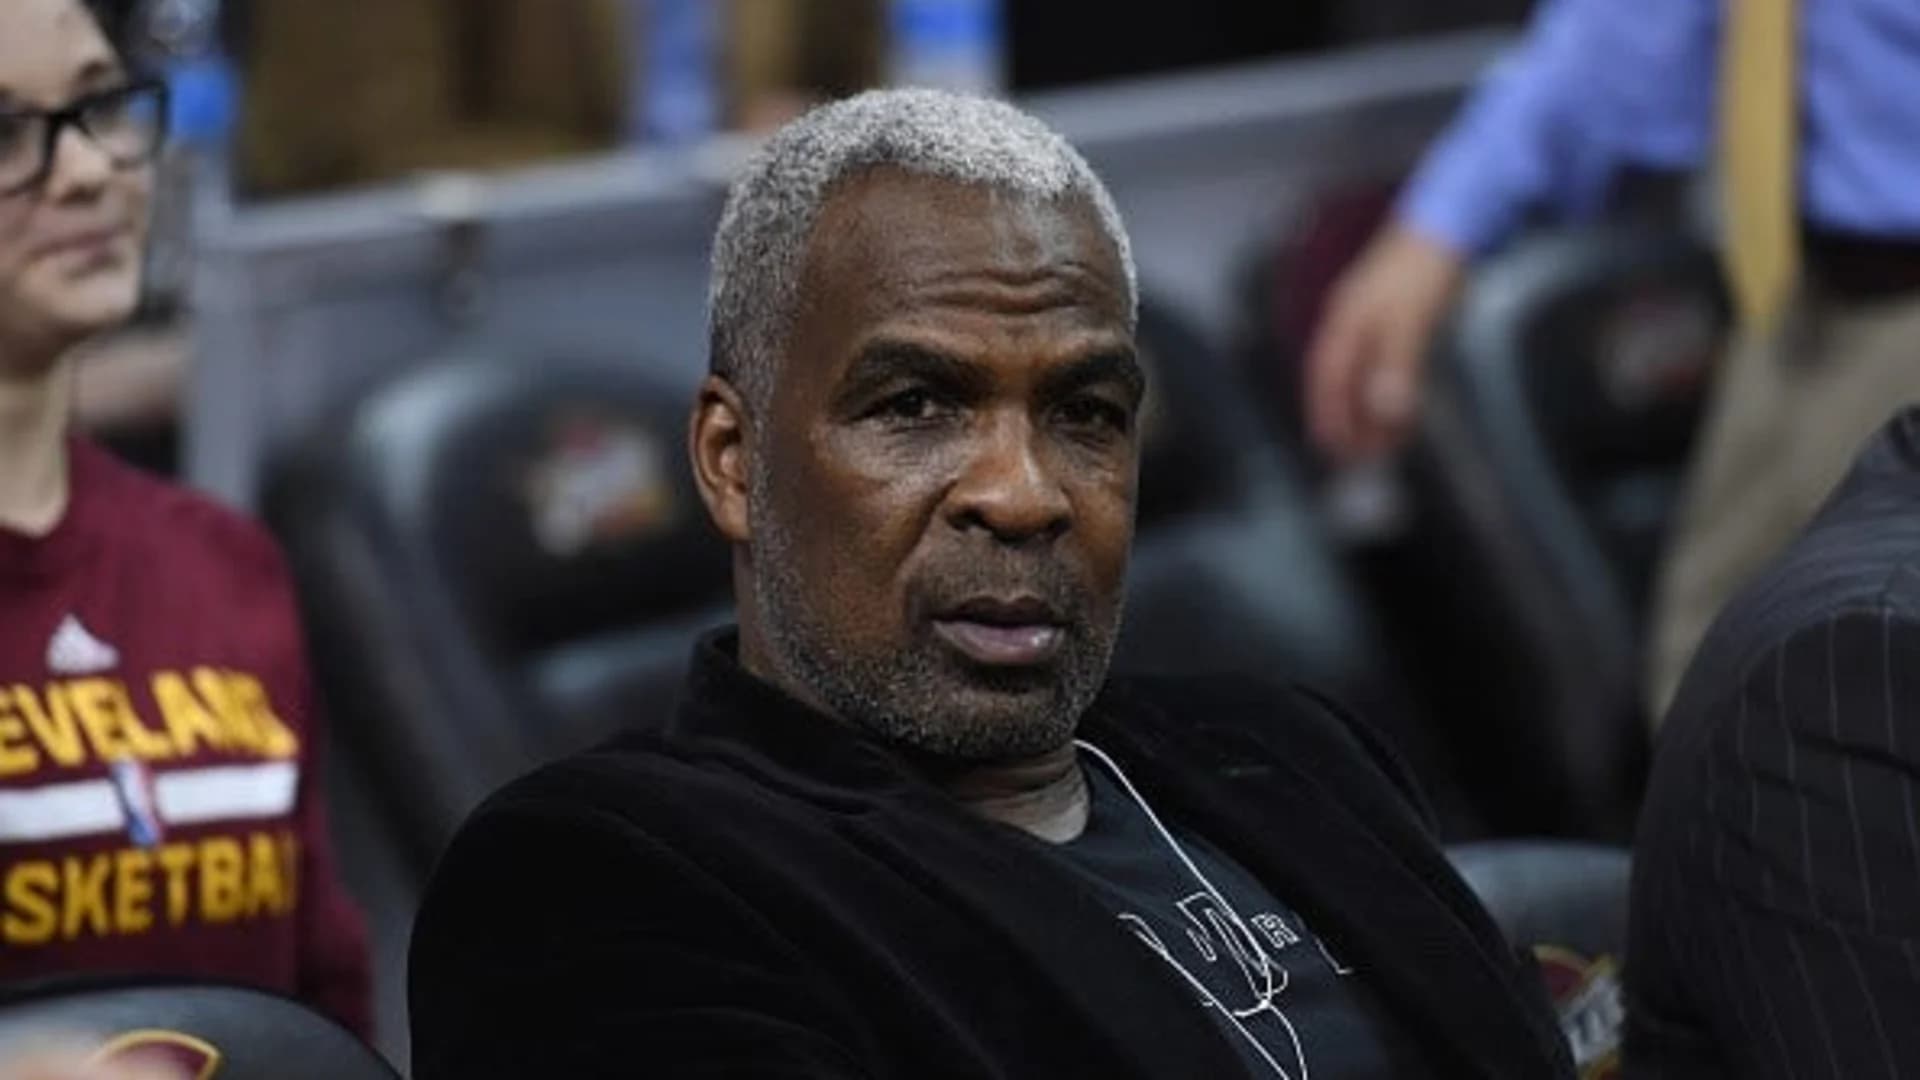 Charles Oakley has deal on charges over melee at Knicks game